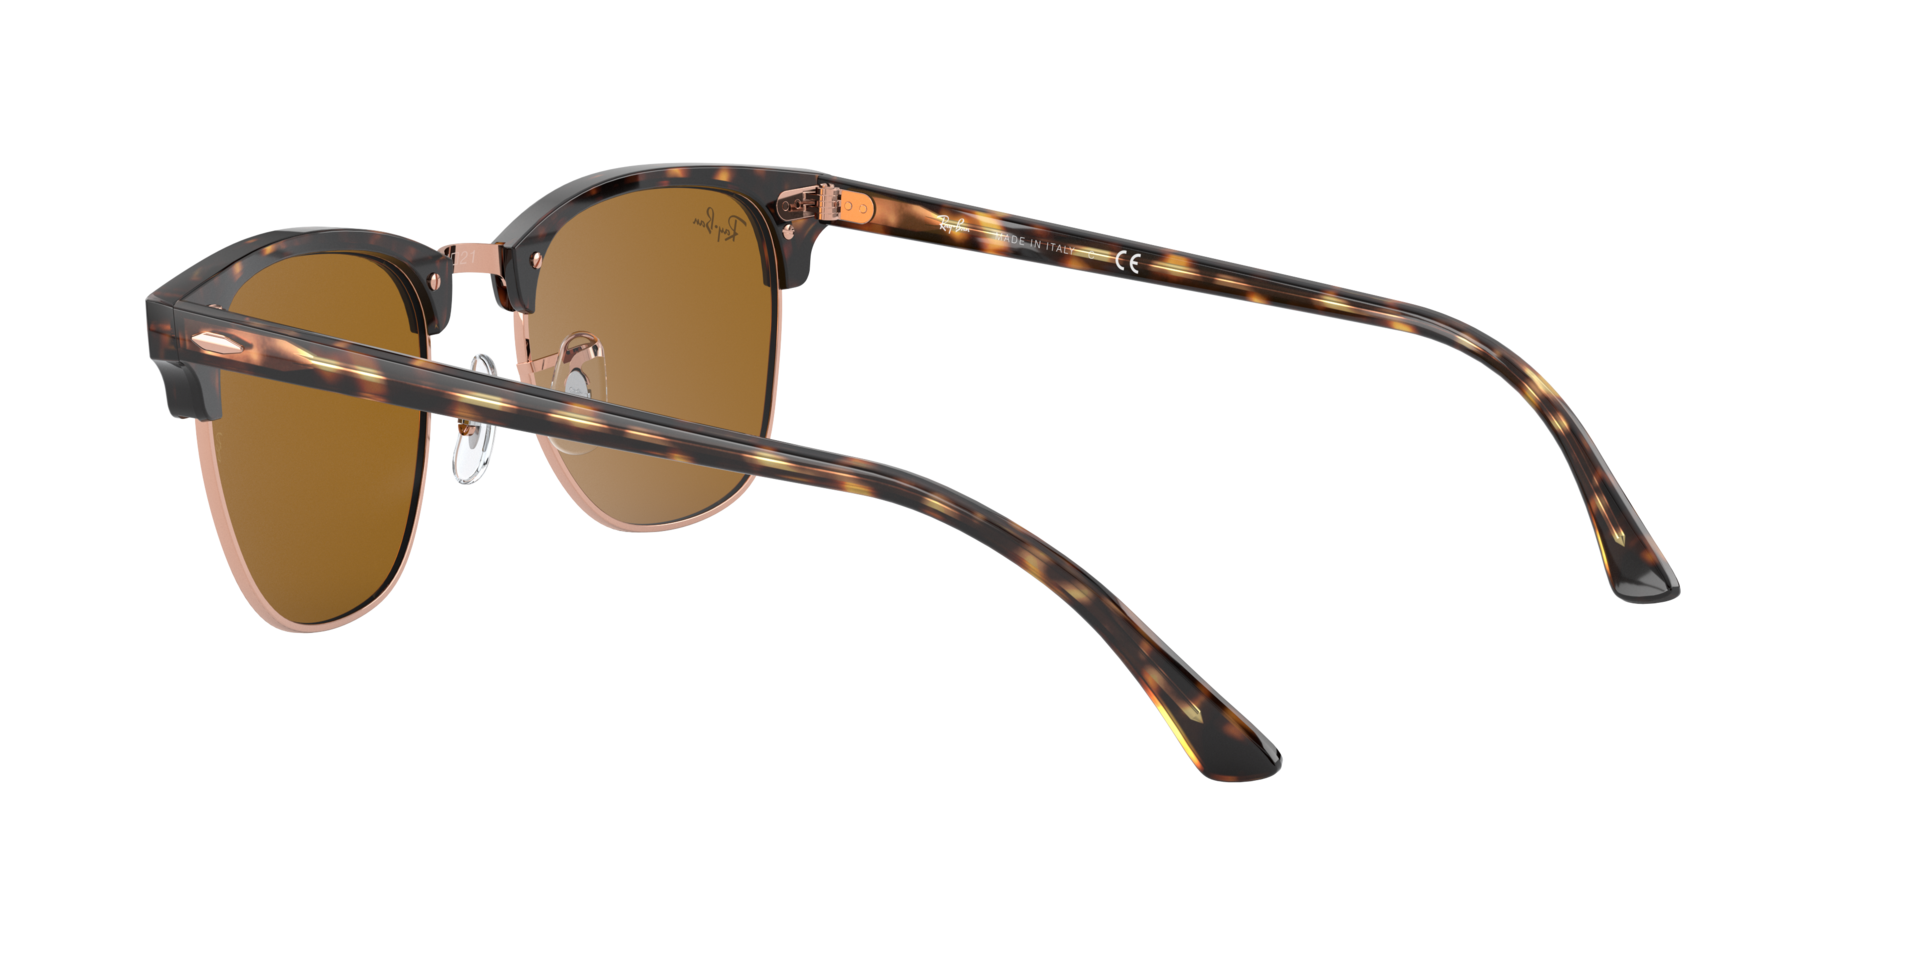 Buy Ray-Ban Clubmaster Sunglasses Online.